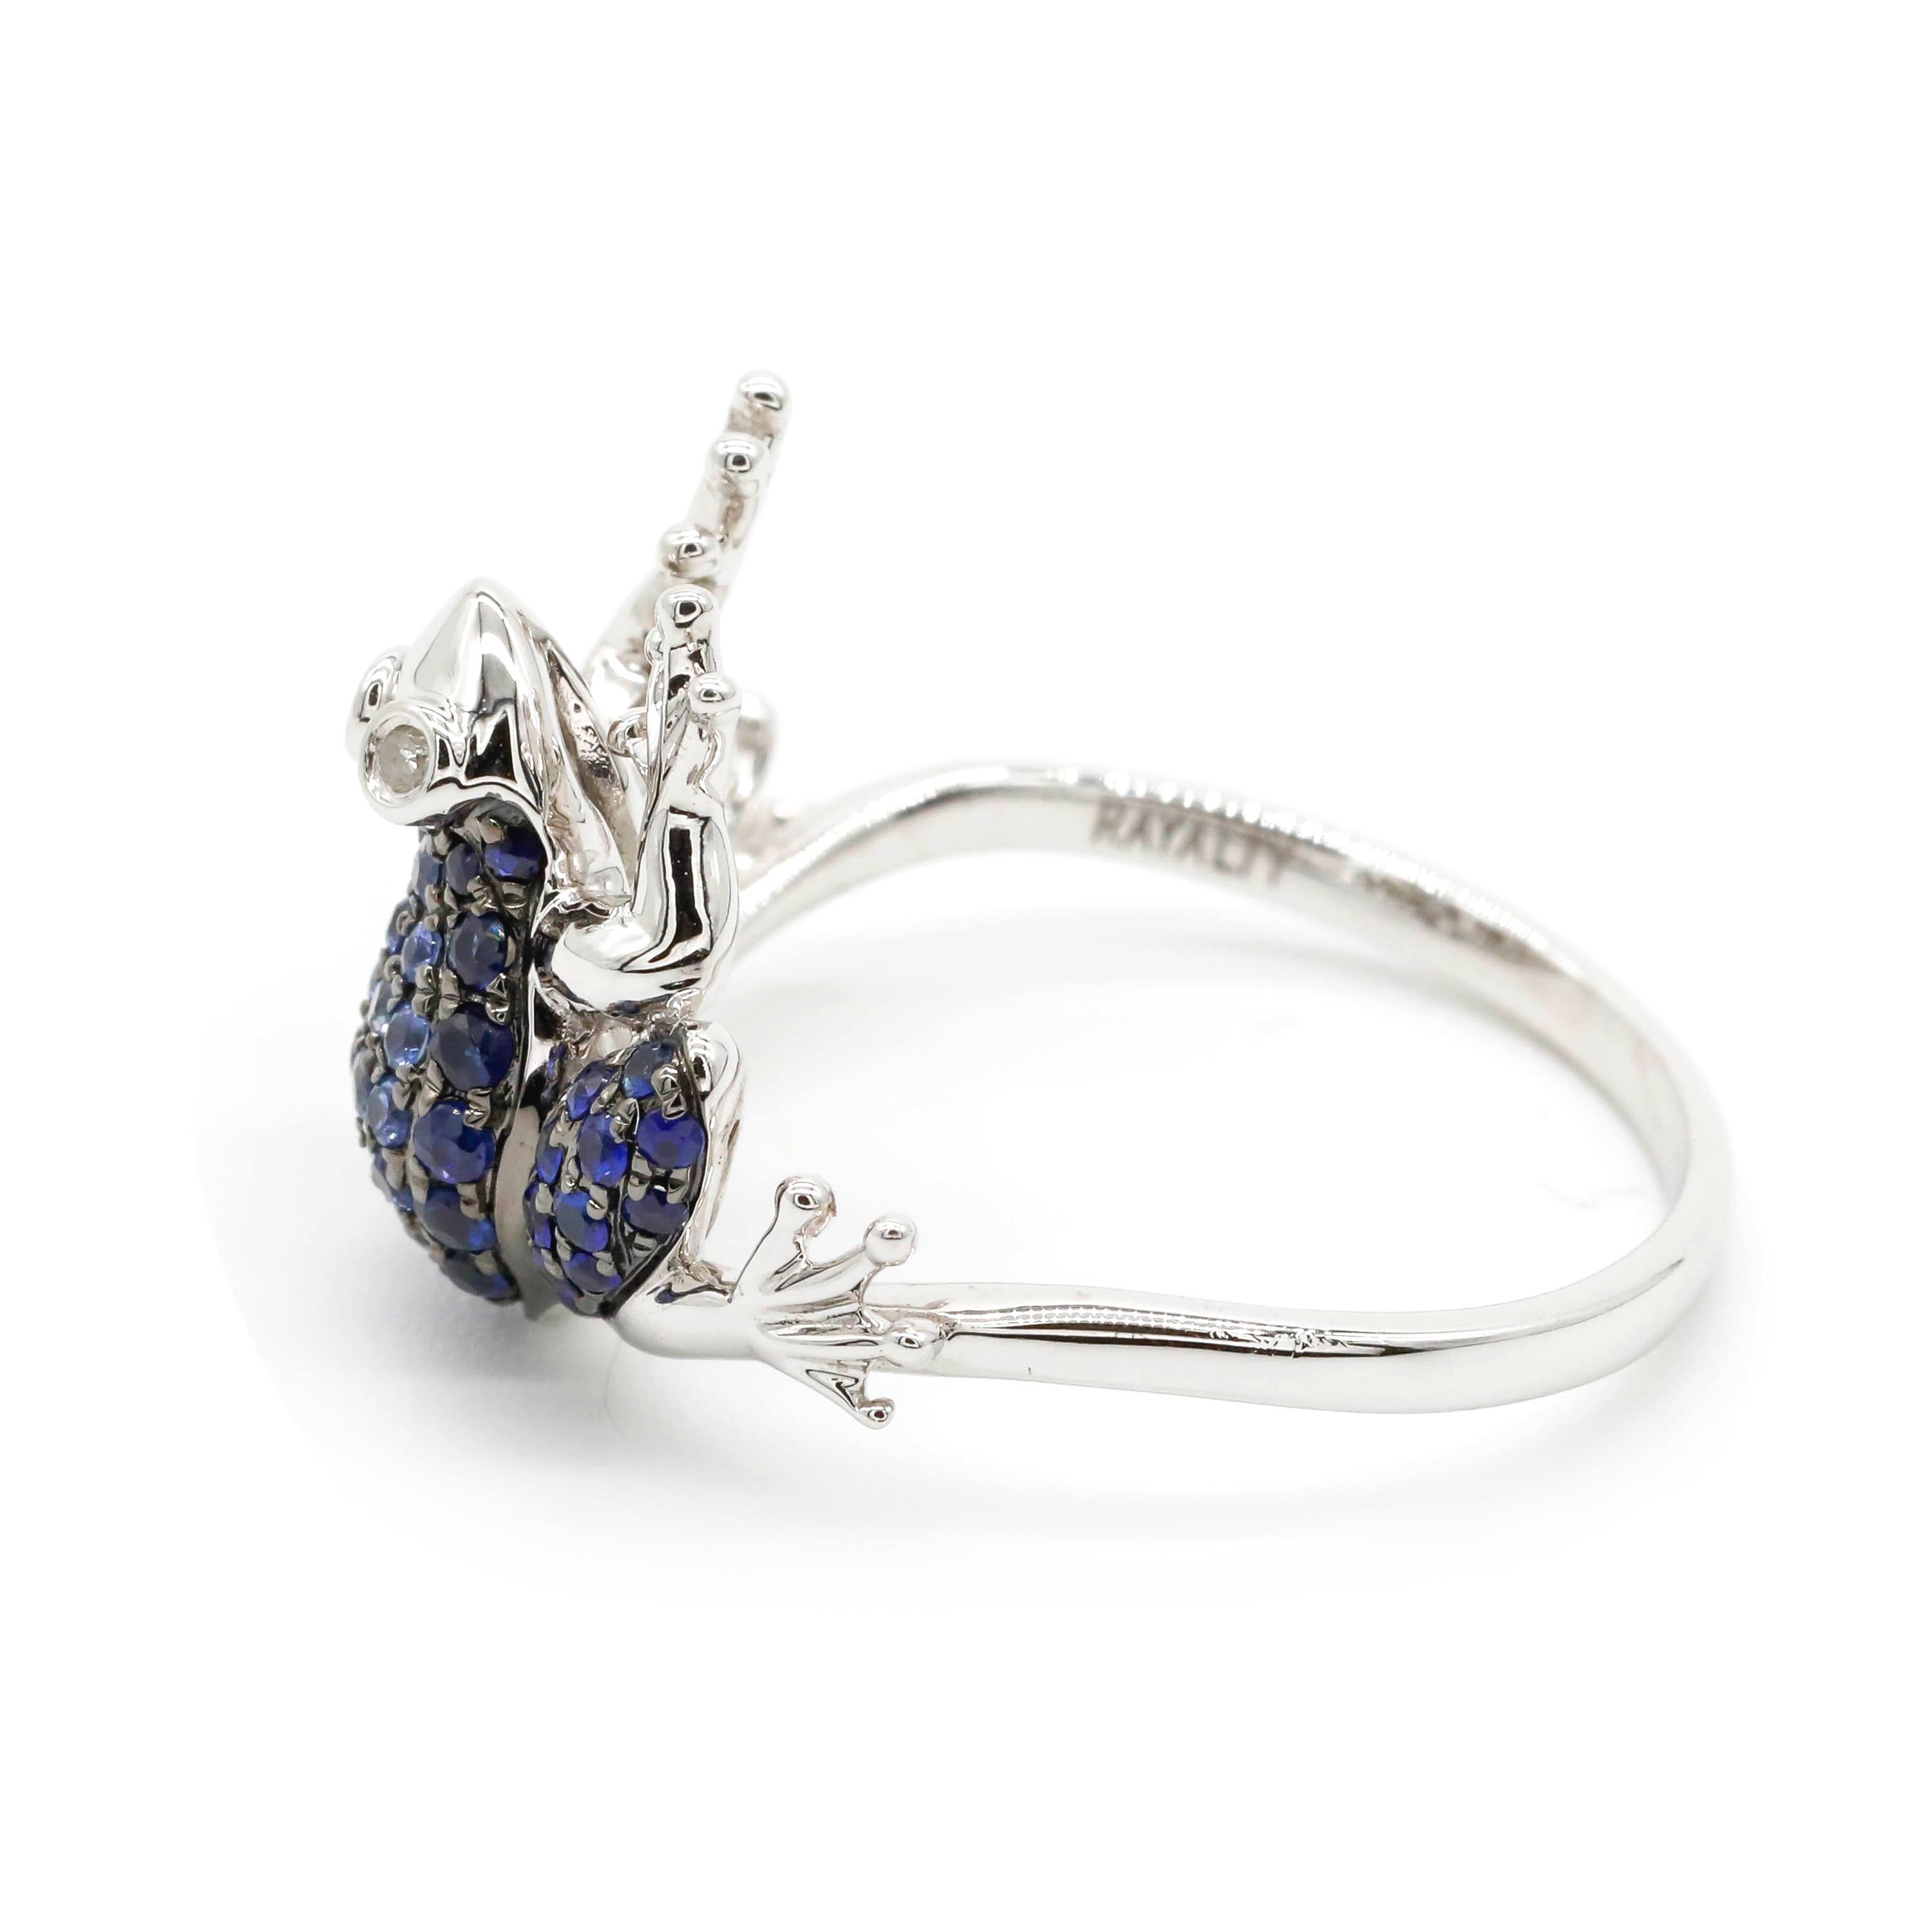 0.55 Carat Round Cut Pave Blue Sapphire 14k White Gold Good Luck Frog Ring

This modern ring features a total of 0.55 carats of Blue Sapphire Round Shape Gemstone Set in 14K White Gold.

We guarantee all products sold and our number one priority is